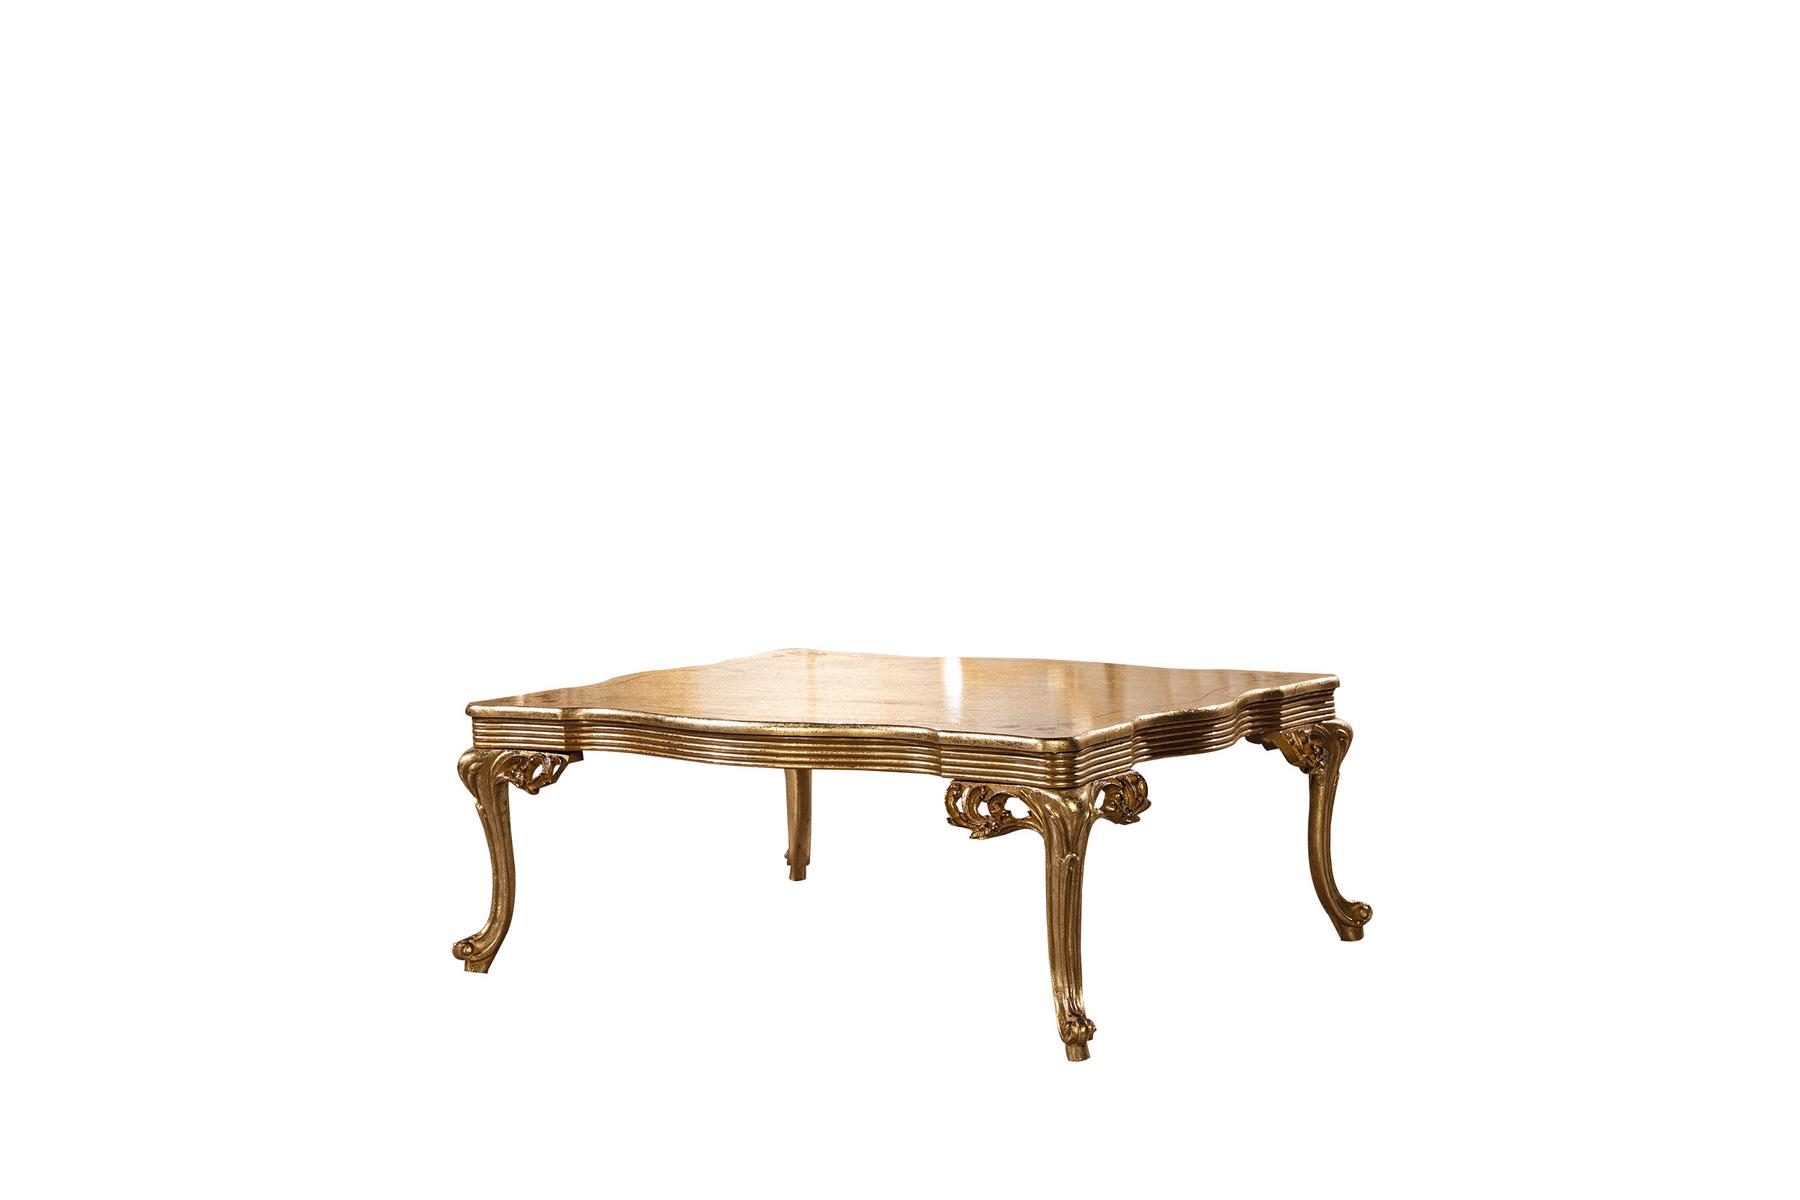 Baroque Rococo Gold Solid Wood Coffee Table for the Living Room